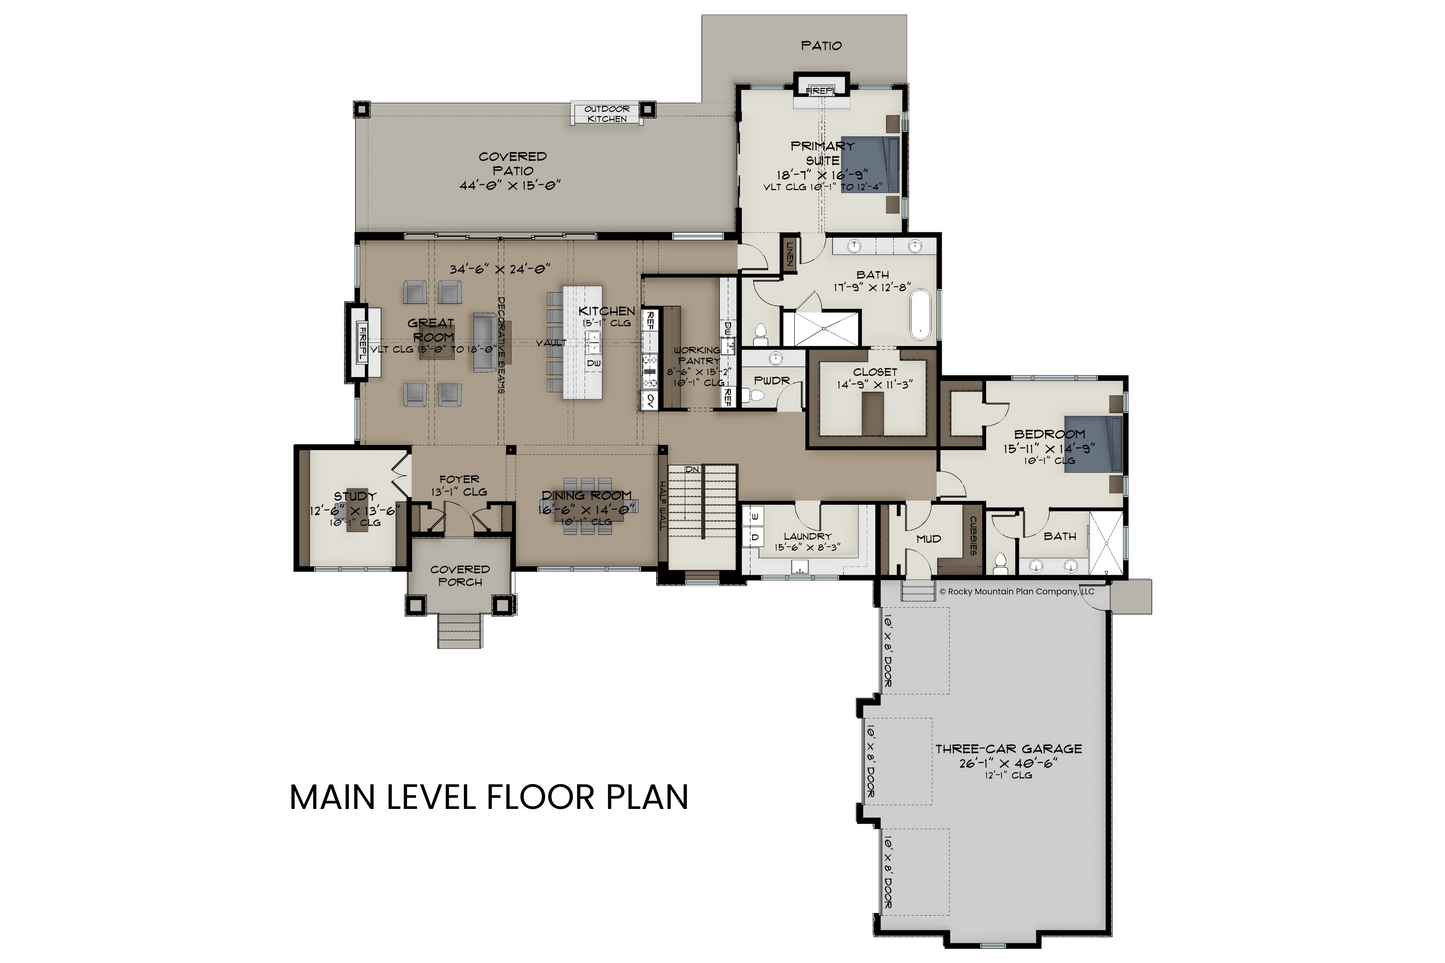 Luxurious-House-Plan-with-Gourmet-Kitchen-and-Working-Pantry-Main-Level-Floor-Plan-Rocky-Mountain-Plan-Company-Stanley-Peak